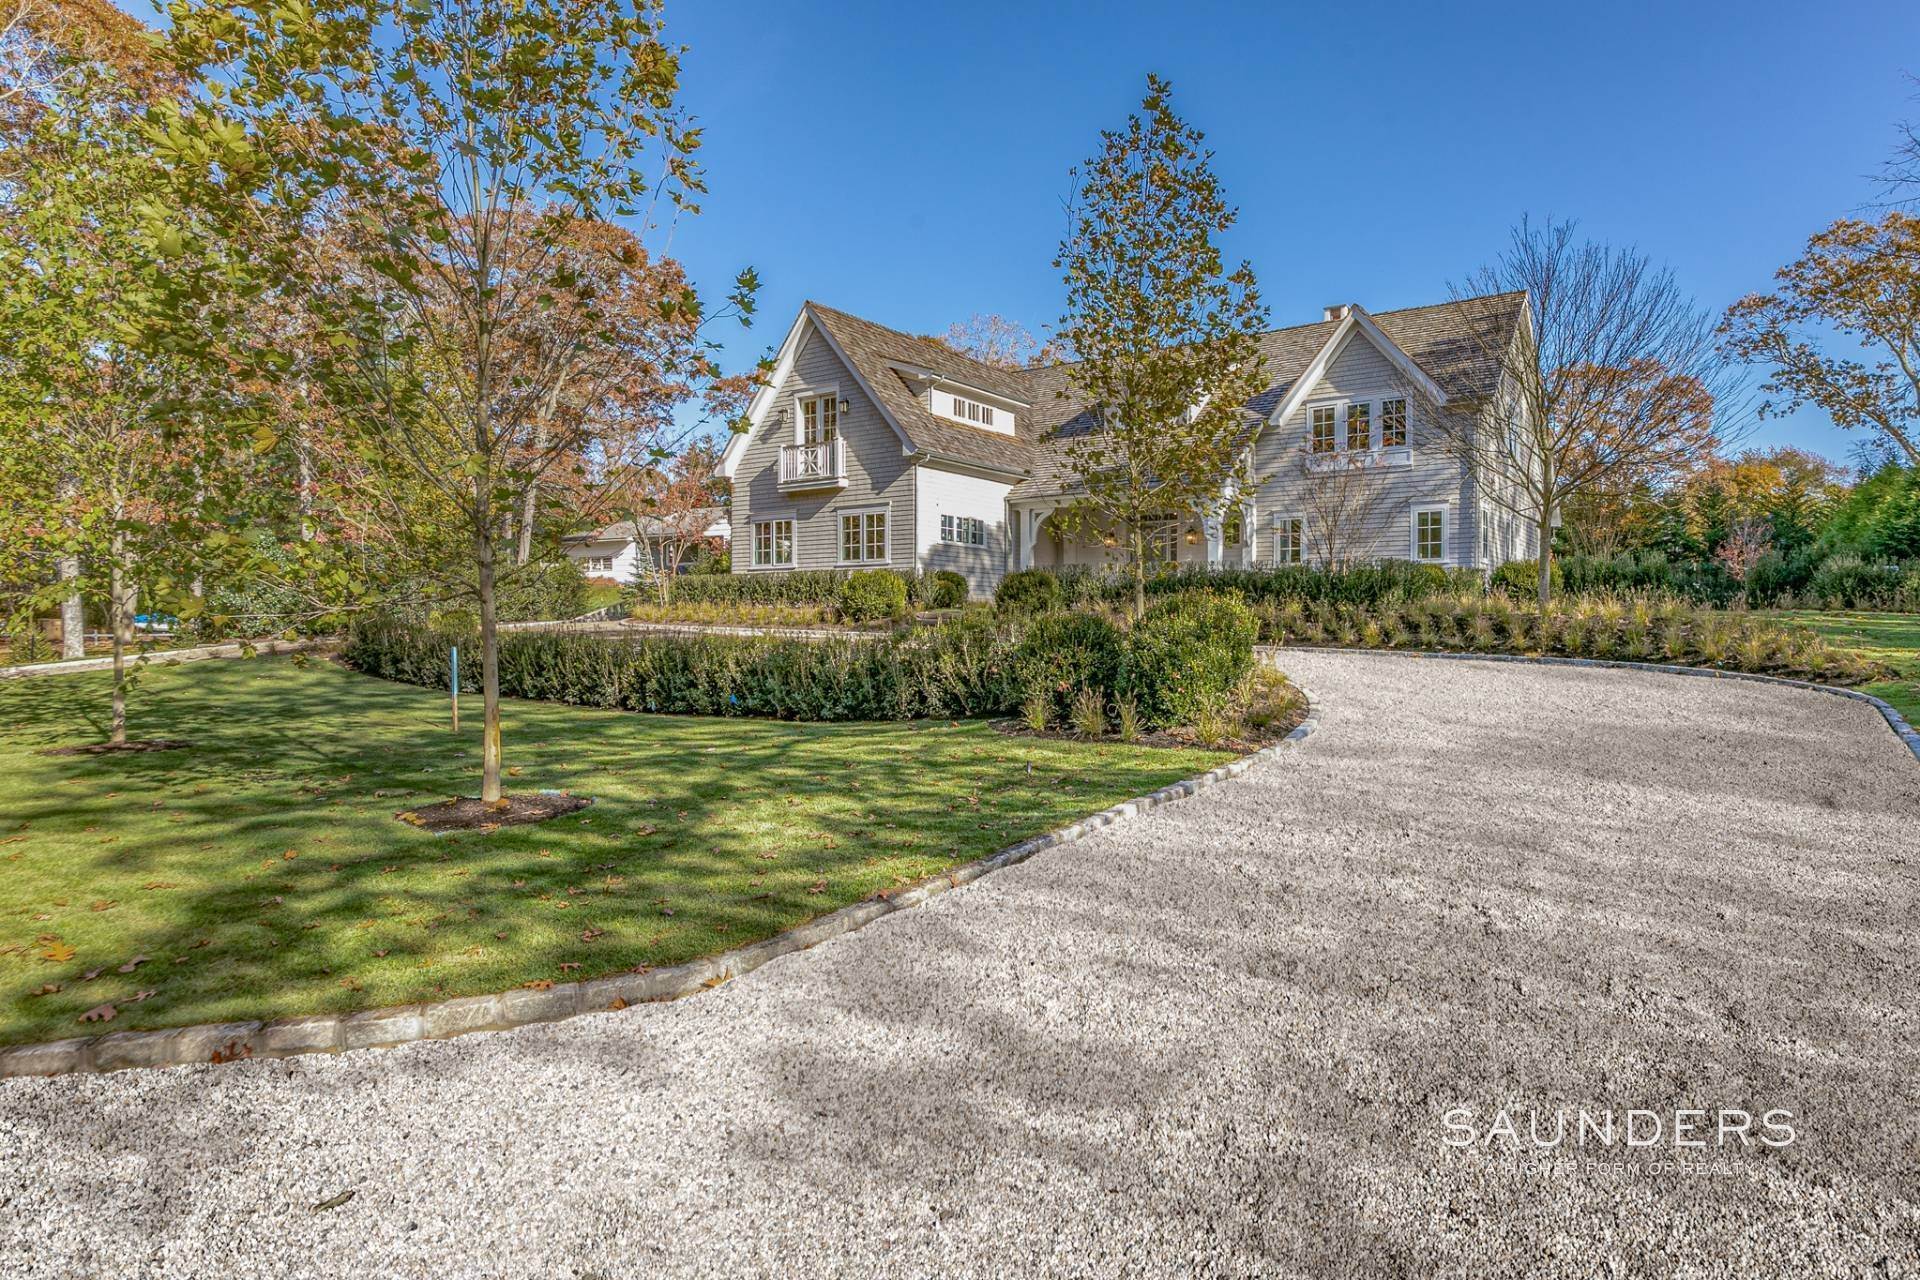 Single Family Homes for Sale at Finished And Fabulous New Construction On Cove Hollow 58 Cove Hollow Road, East Hampton, NY 11937